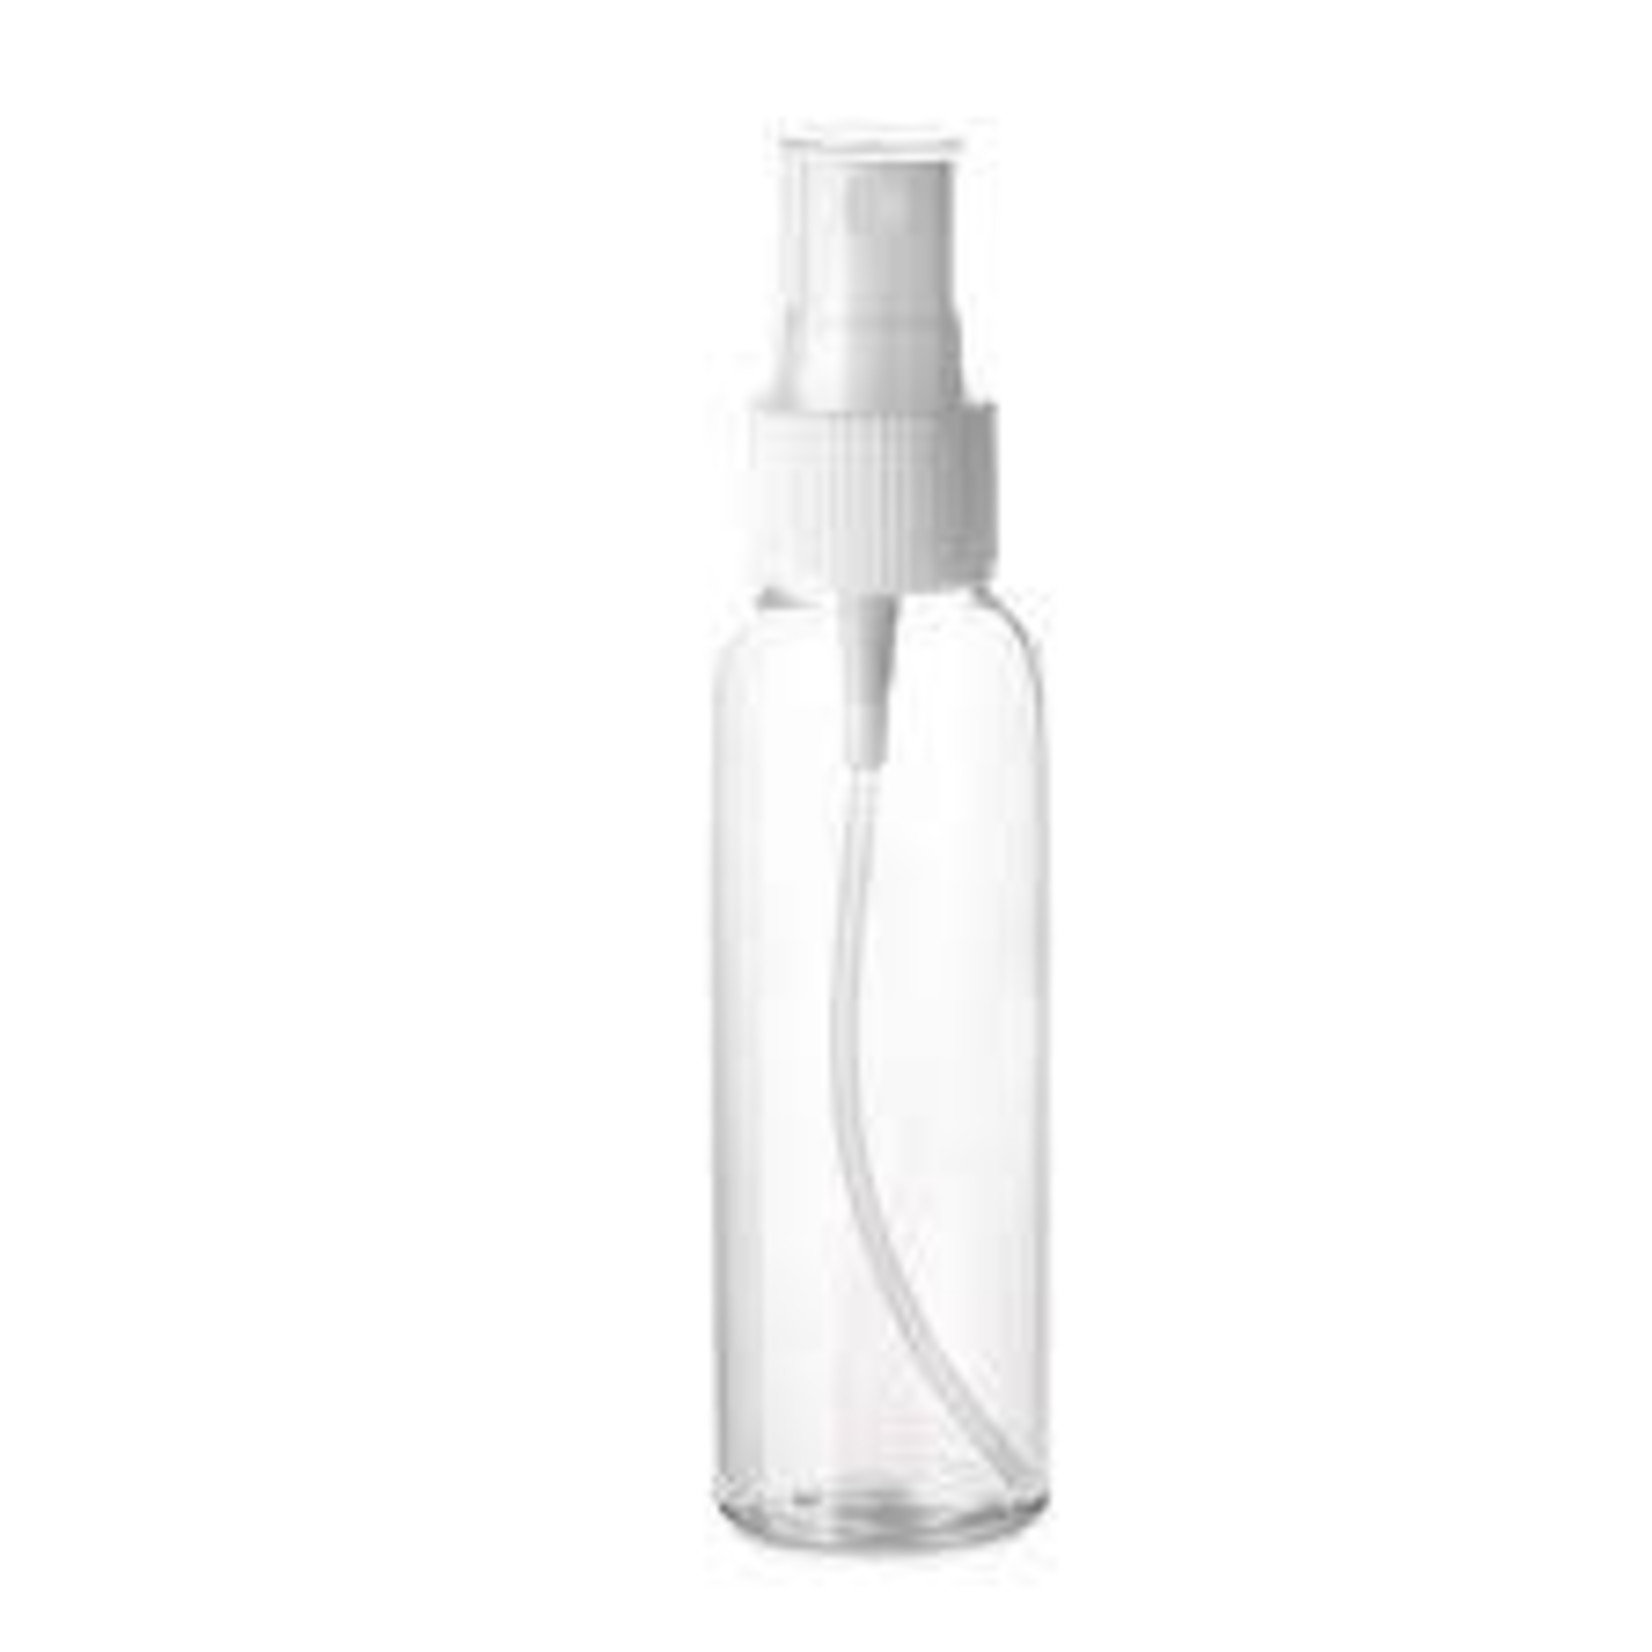 My Essential Business Misting Spray Bottles 6 Pack